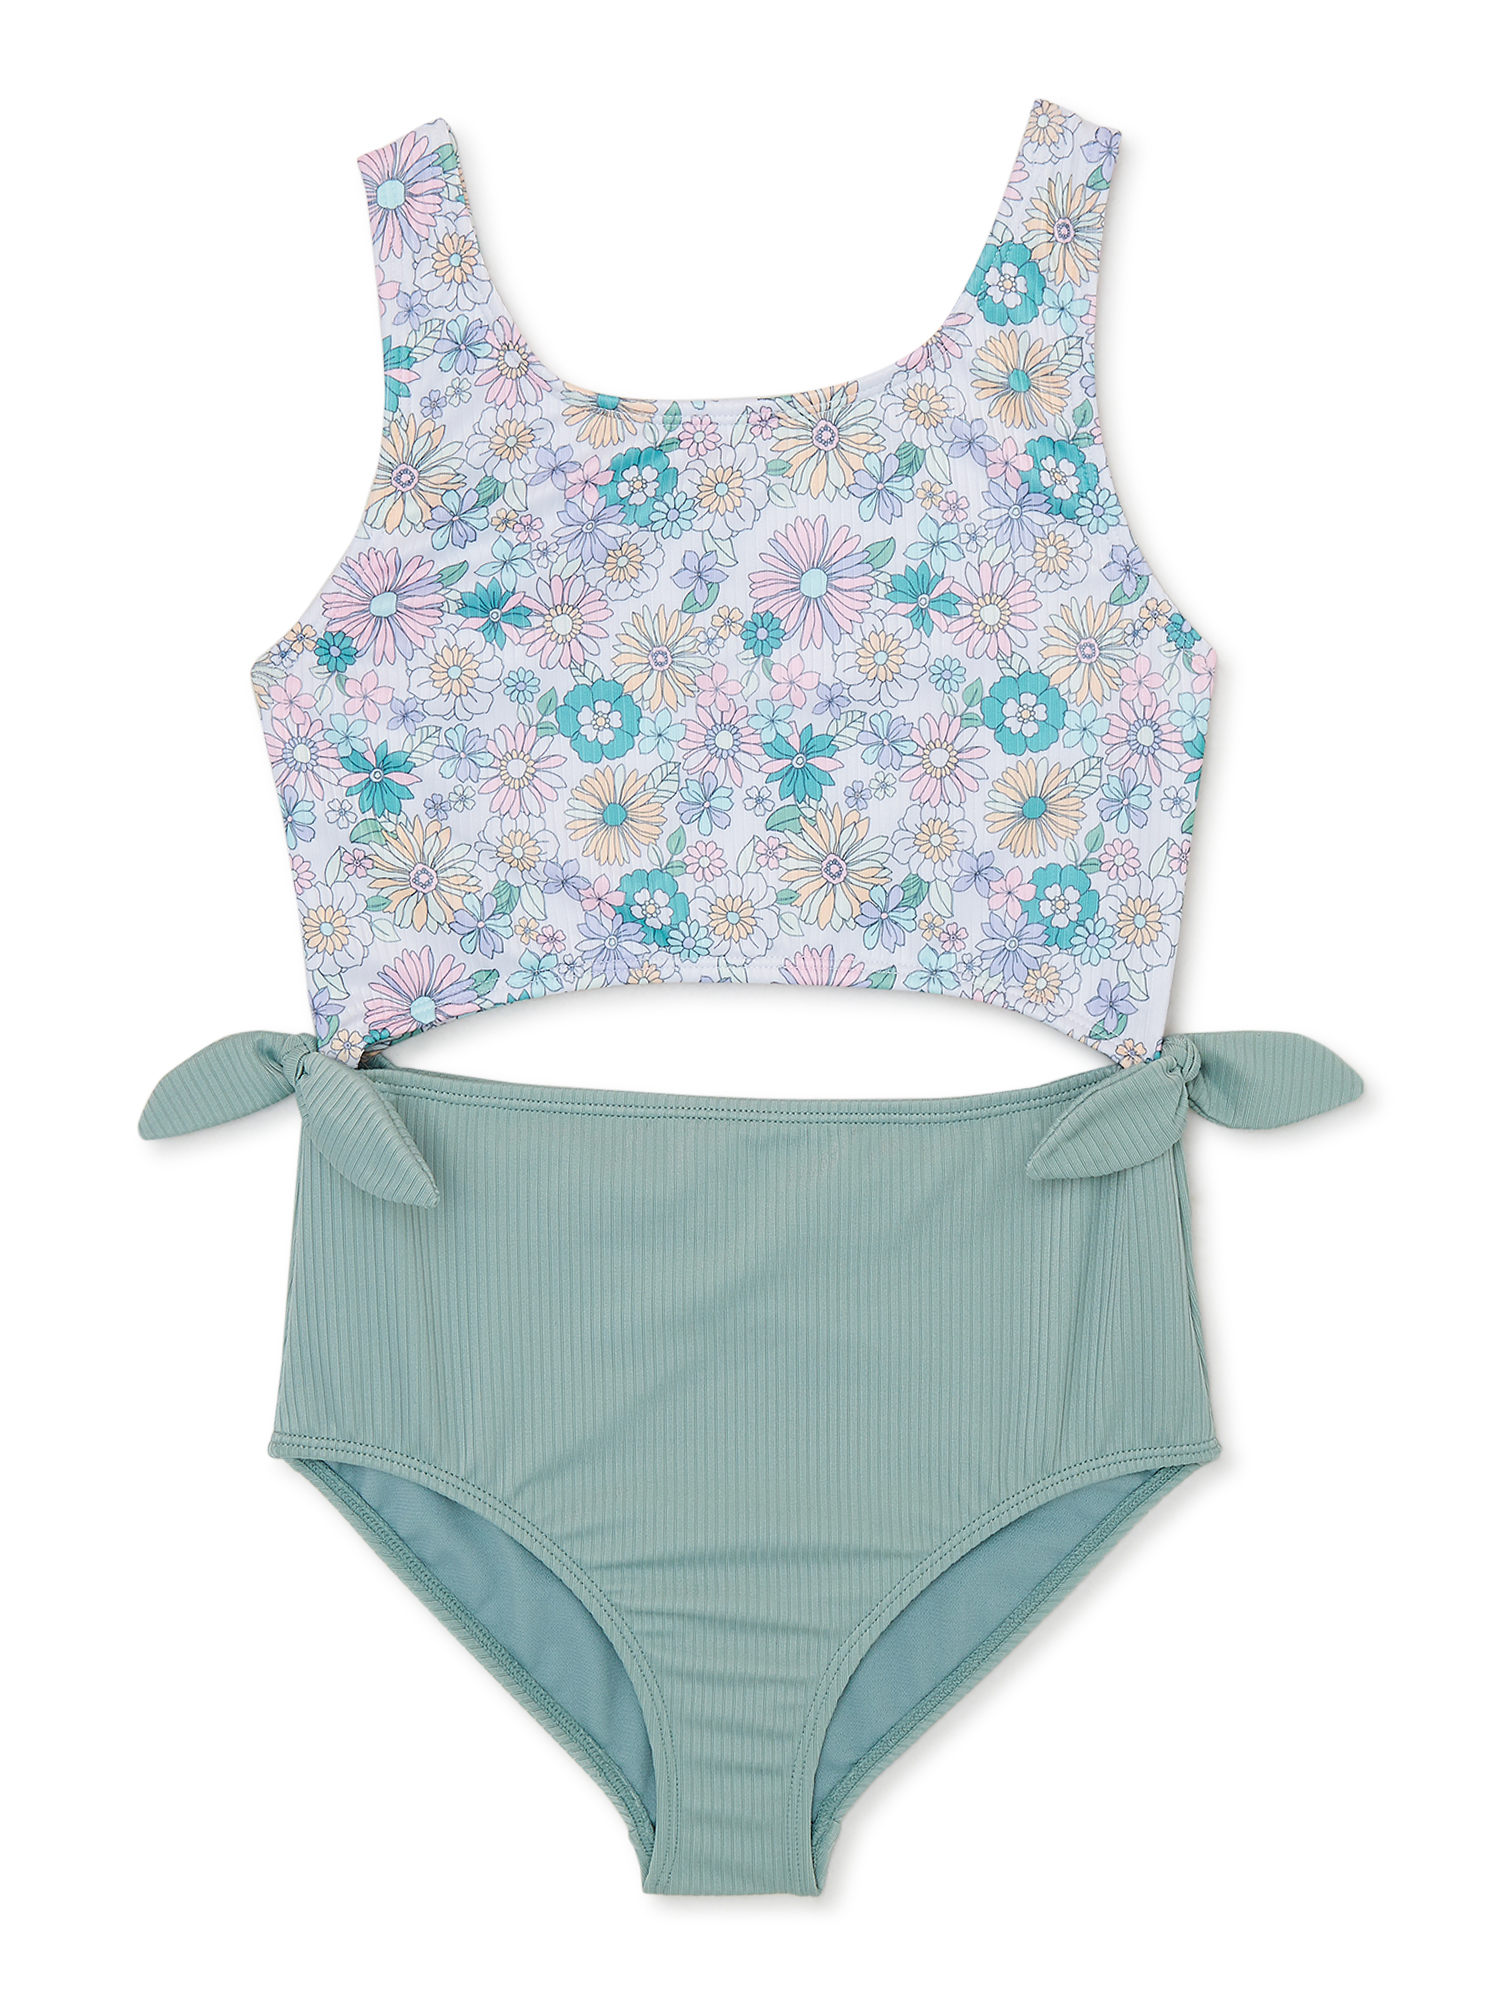 Wonder Nation Girl's Side Tie Swimsuit, 1-Piece, Sizes 4-18 & Plus - image 1 of 3